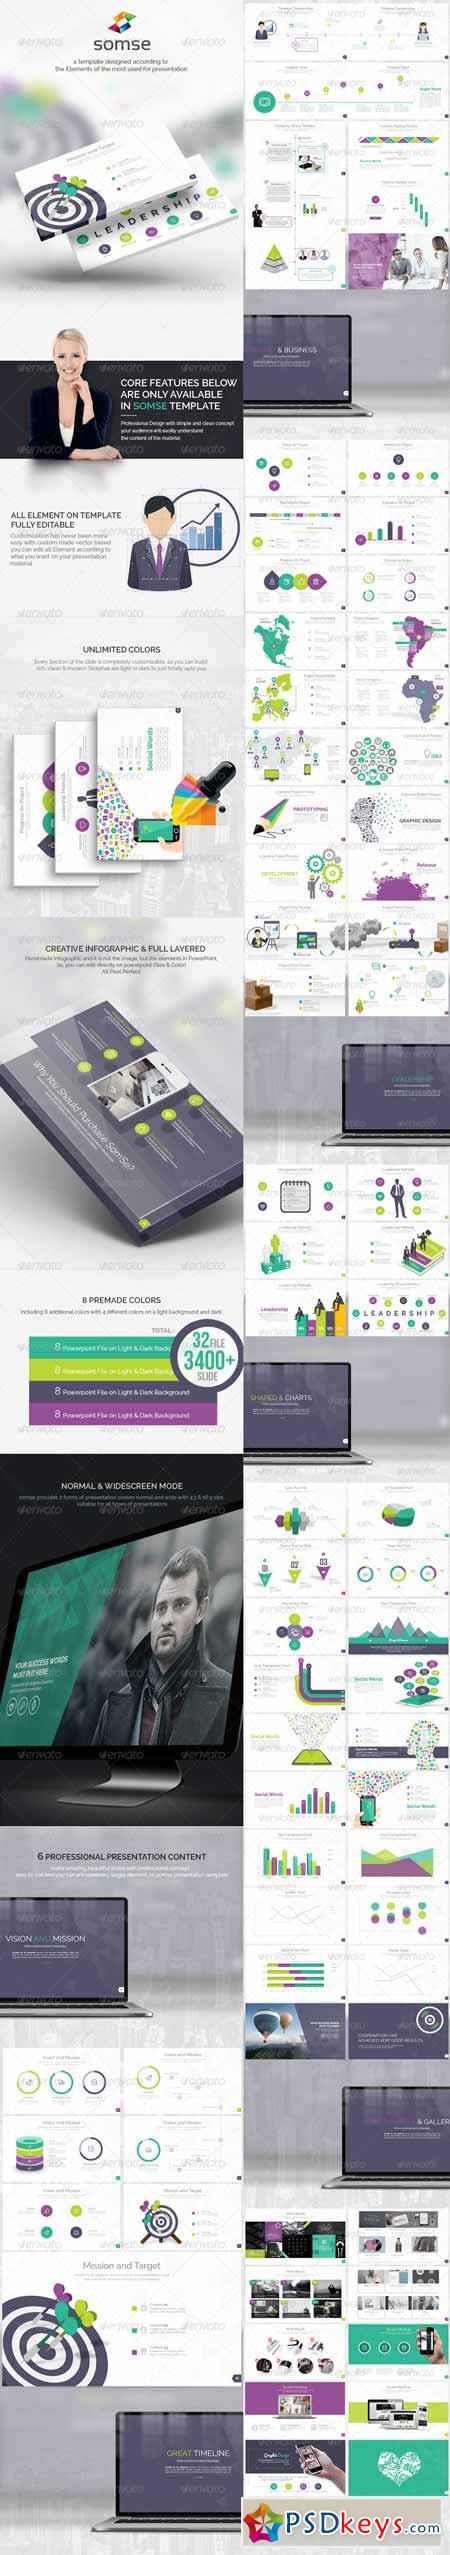 Somse - All in One Powerpoint Template 8414563